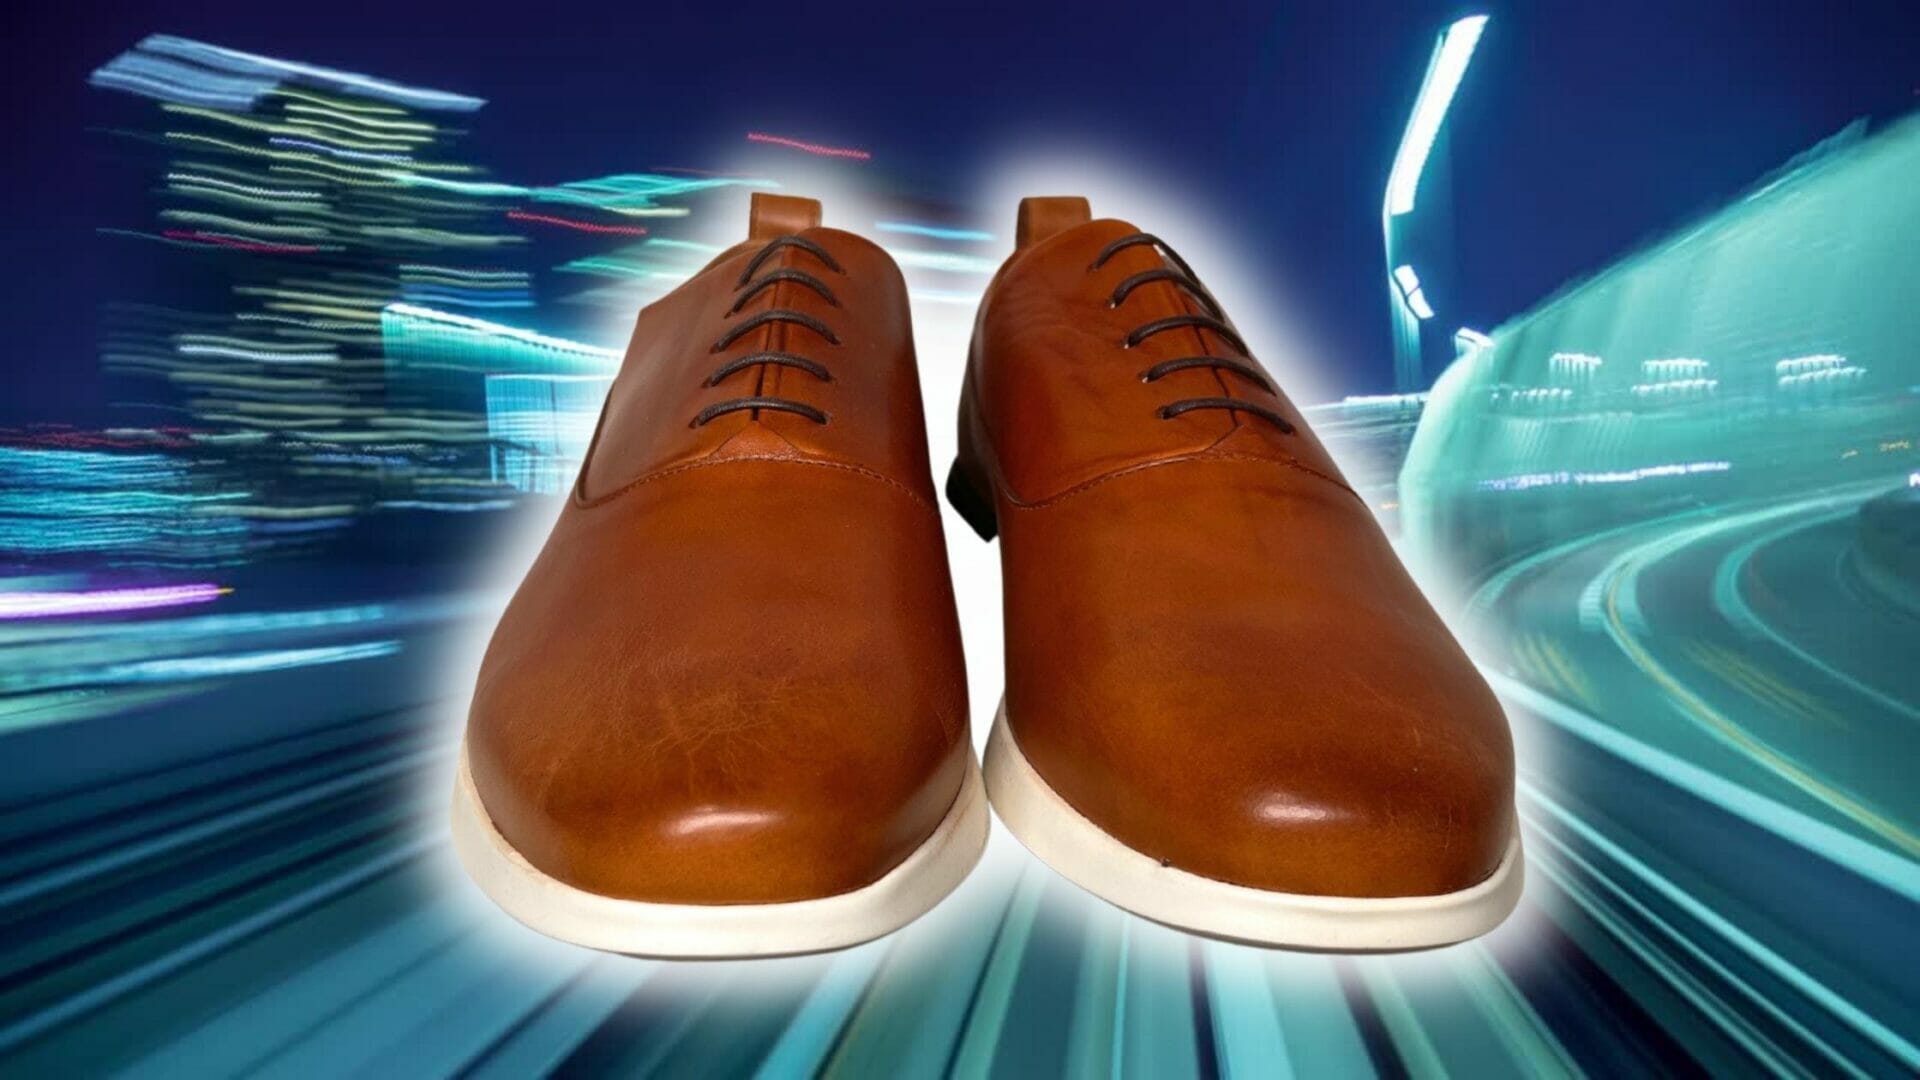 Featured image for “Wolf and Shepherd Review: We Test Another High-Tech Dress Shoe”